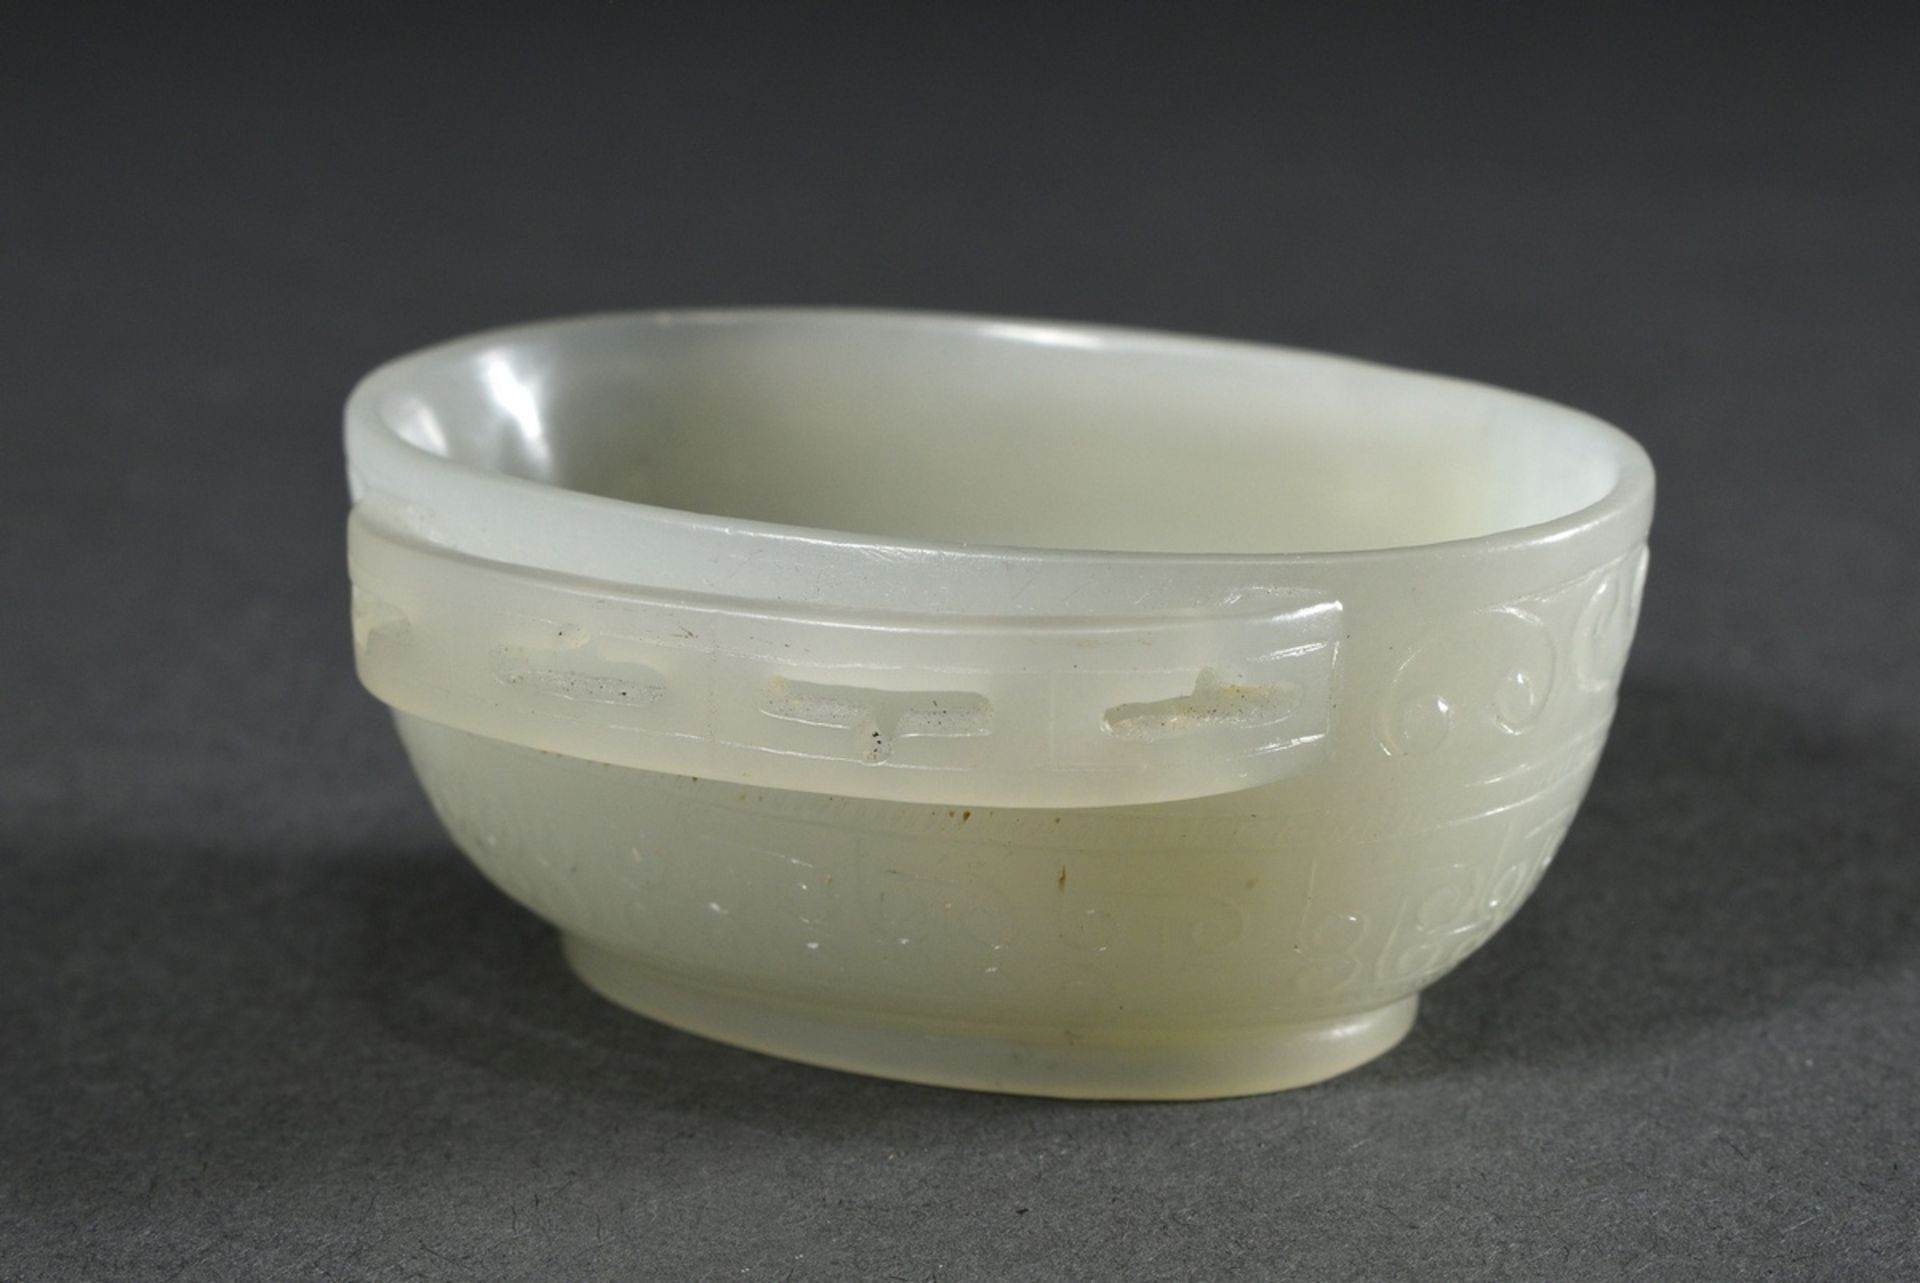 Seladon jade "ear bowl" in Han style with openwork handles and cut relief decoration in archaic sty - Image 2 of 4